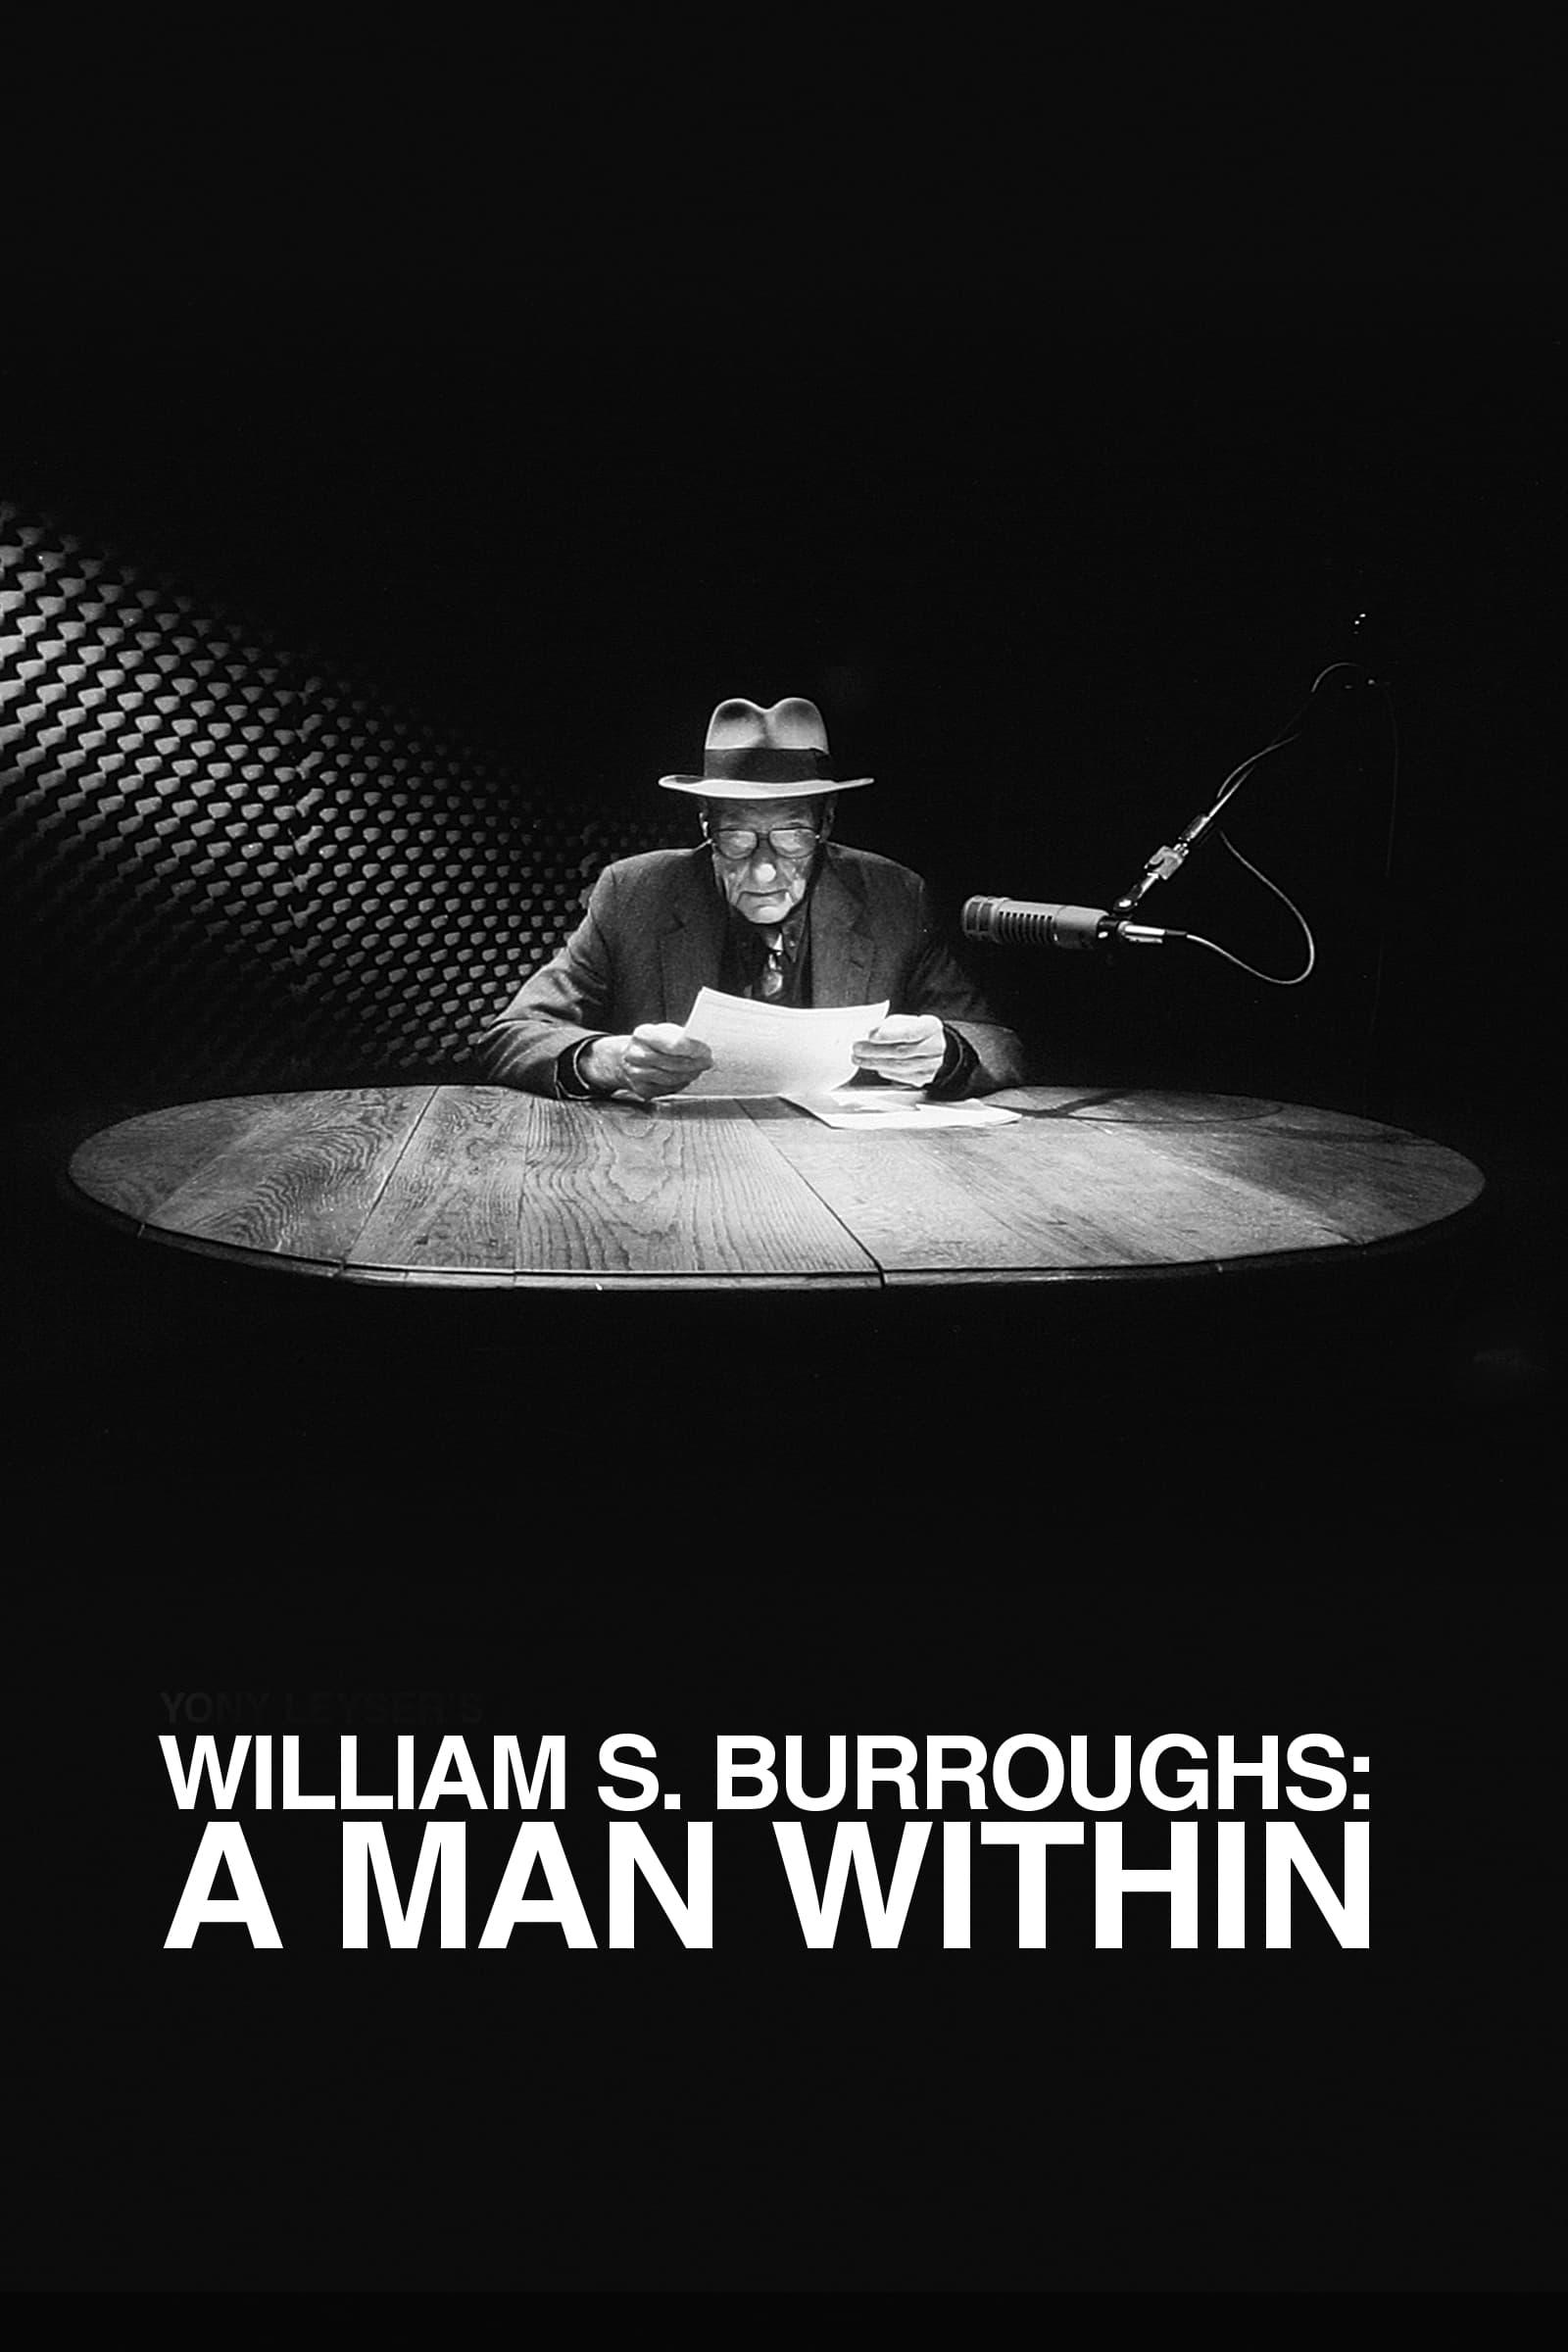 William S. Burroughs: A Man Within poster